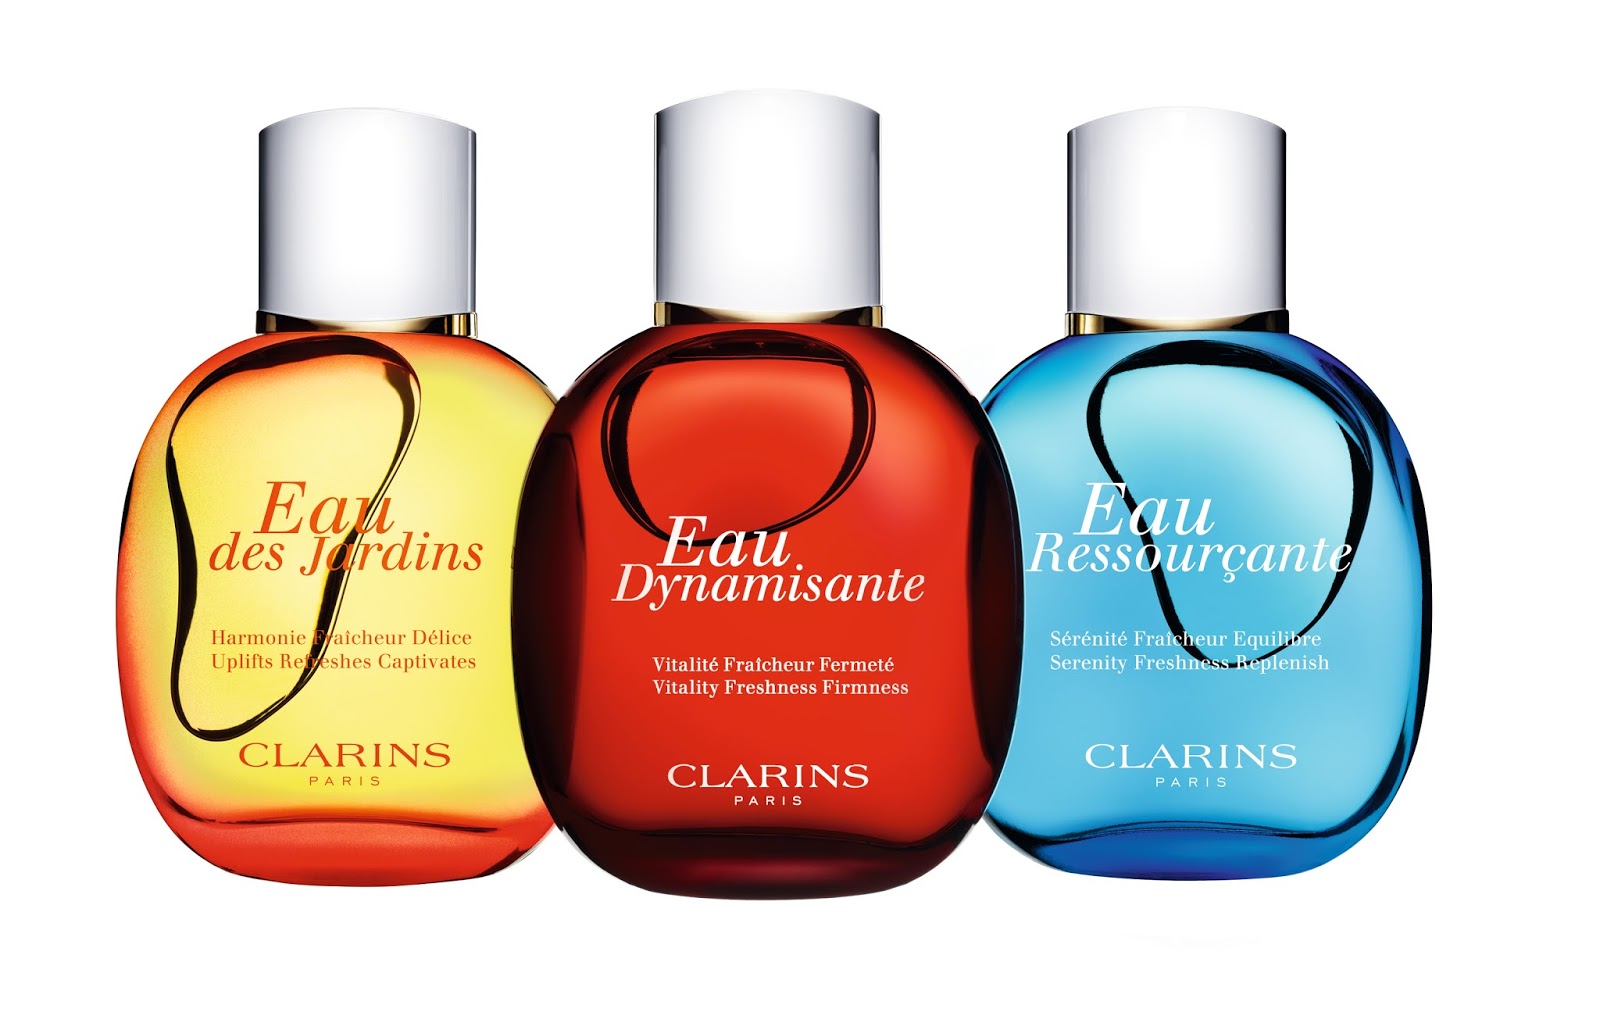 Feel good fragrances from Clarins